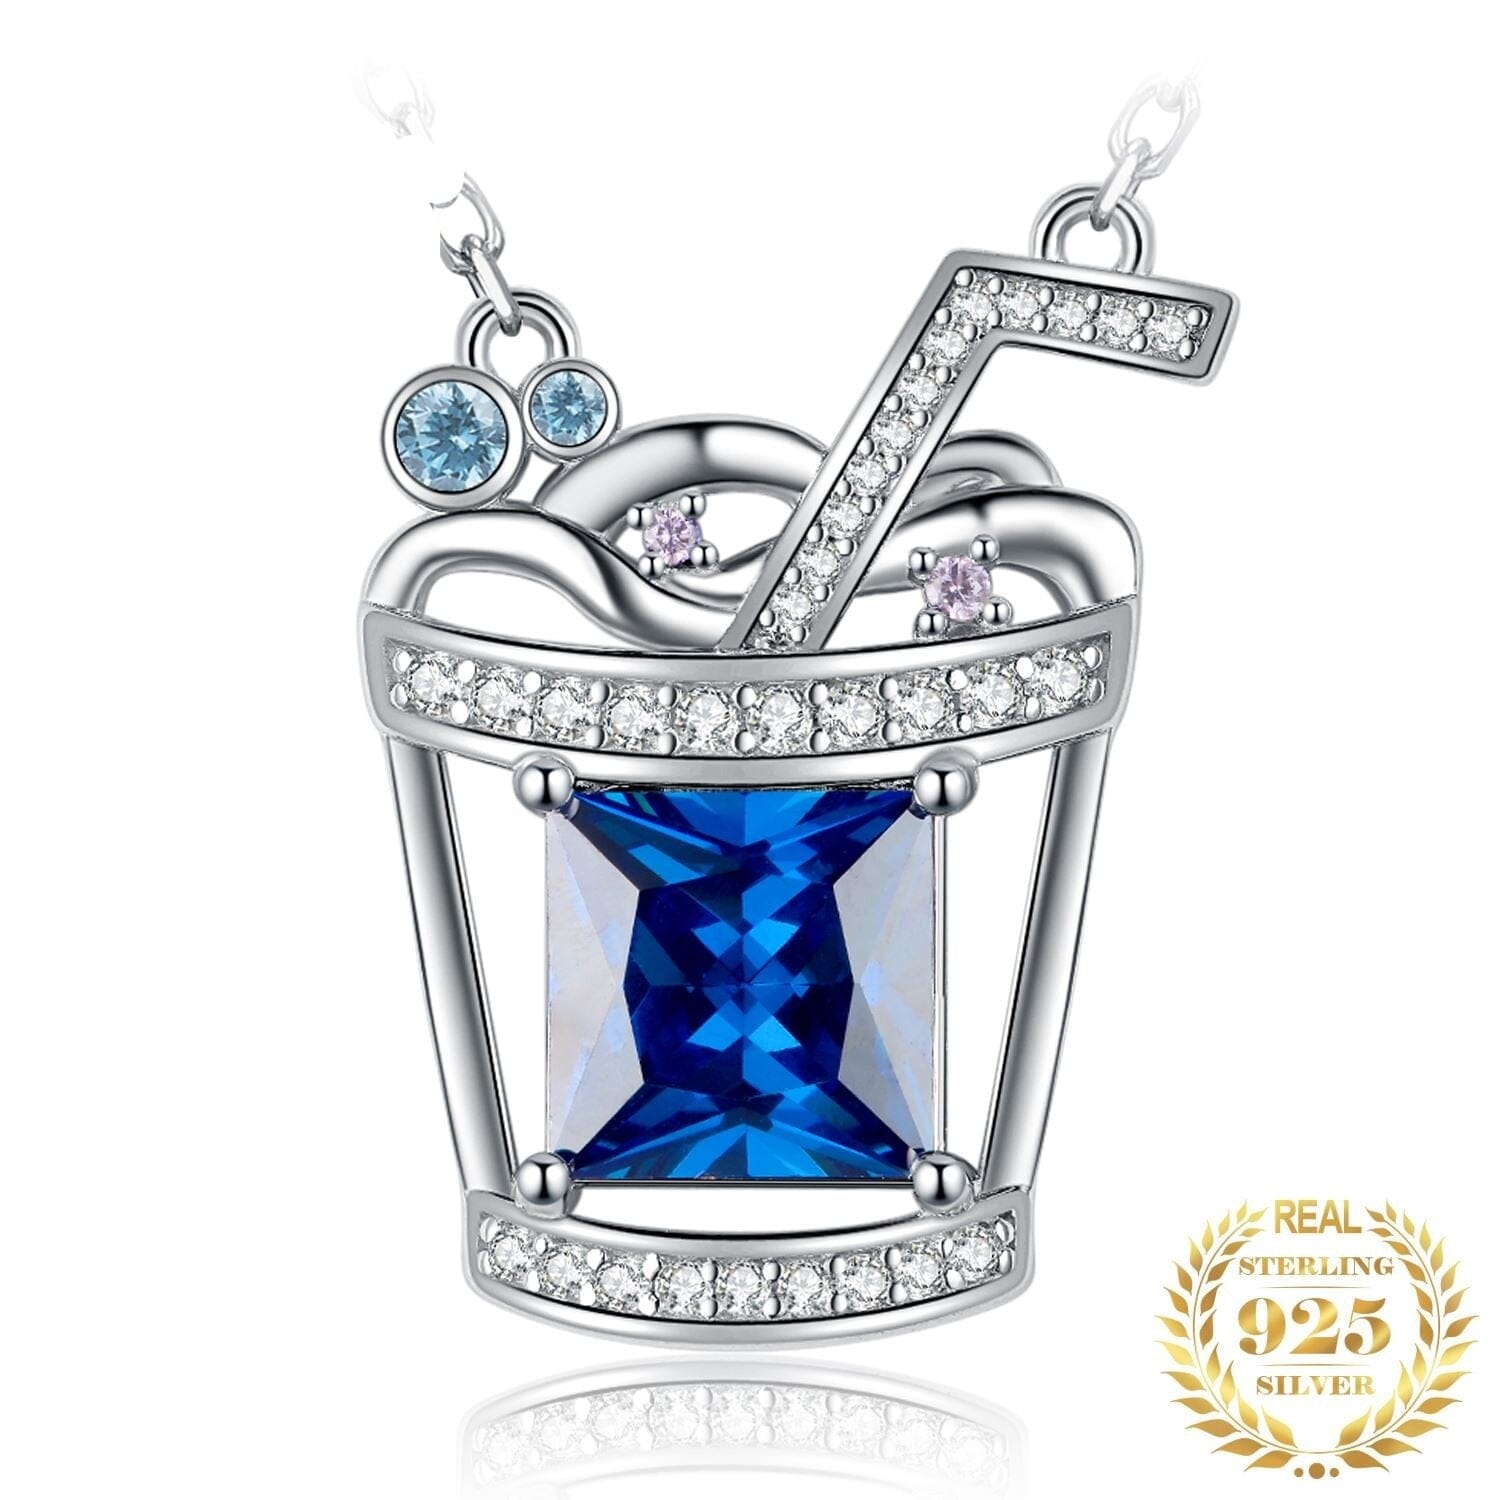 Fashion Ice Cold Drink 3.1ct Blue Sapphire Gemstone Necklace - 925 Sterling SilverNecklace